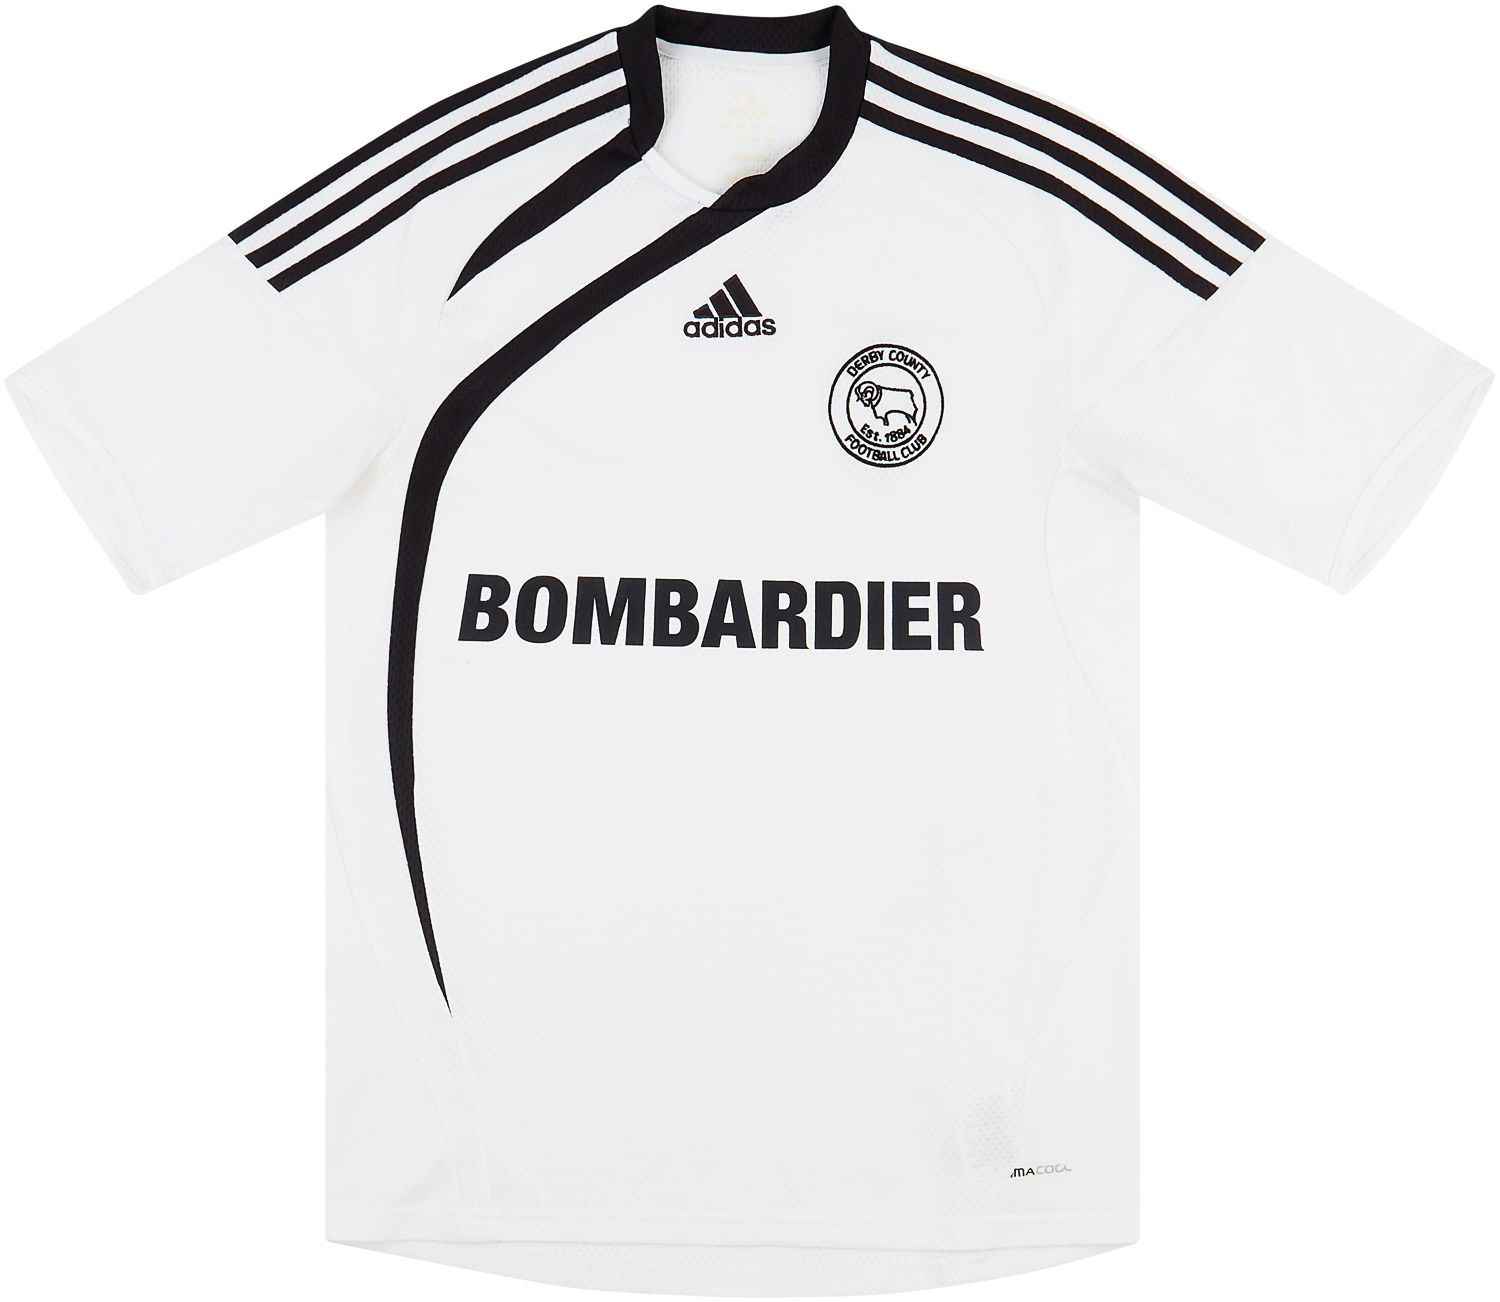 2009-10 Derby County Home Shirt - 8/10 - ()